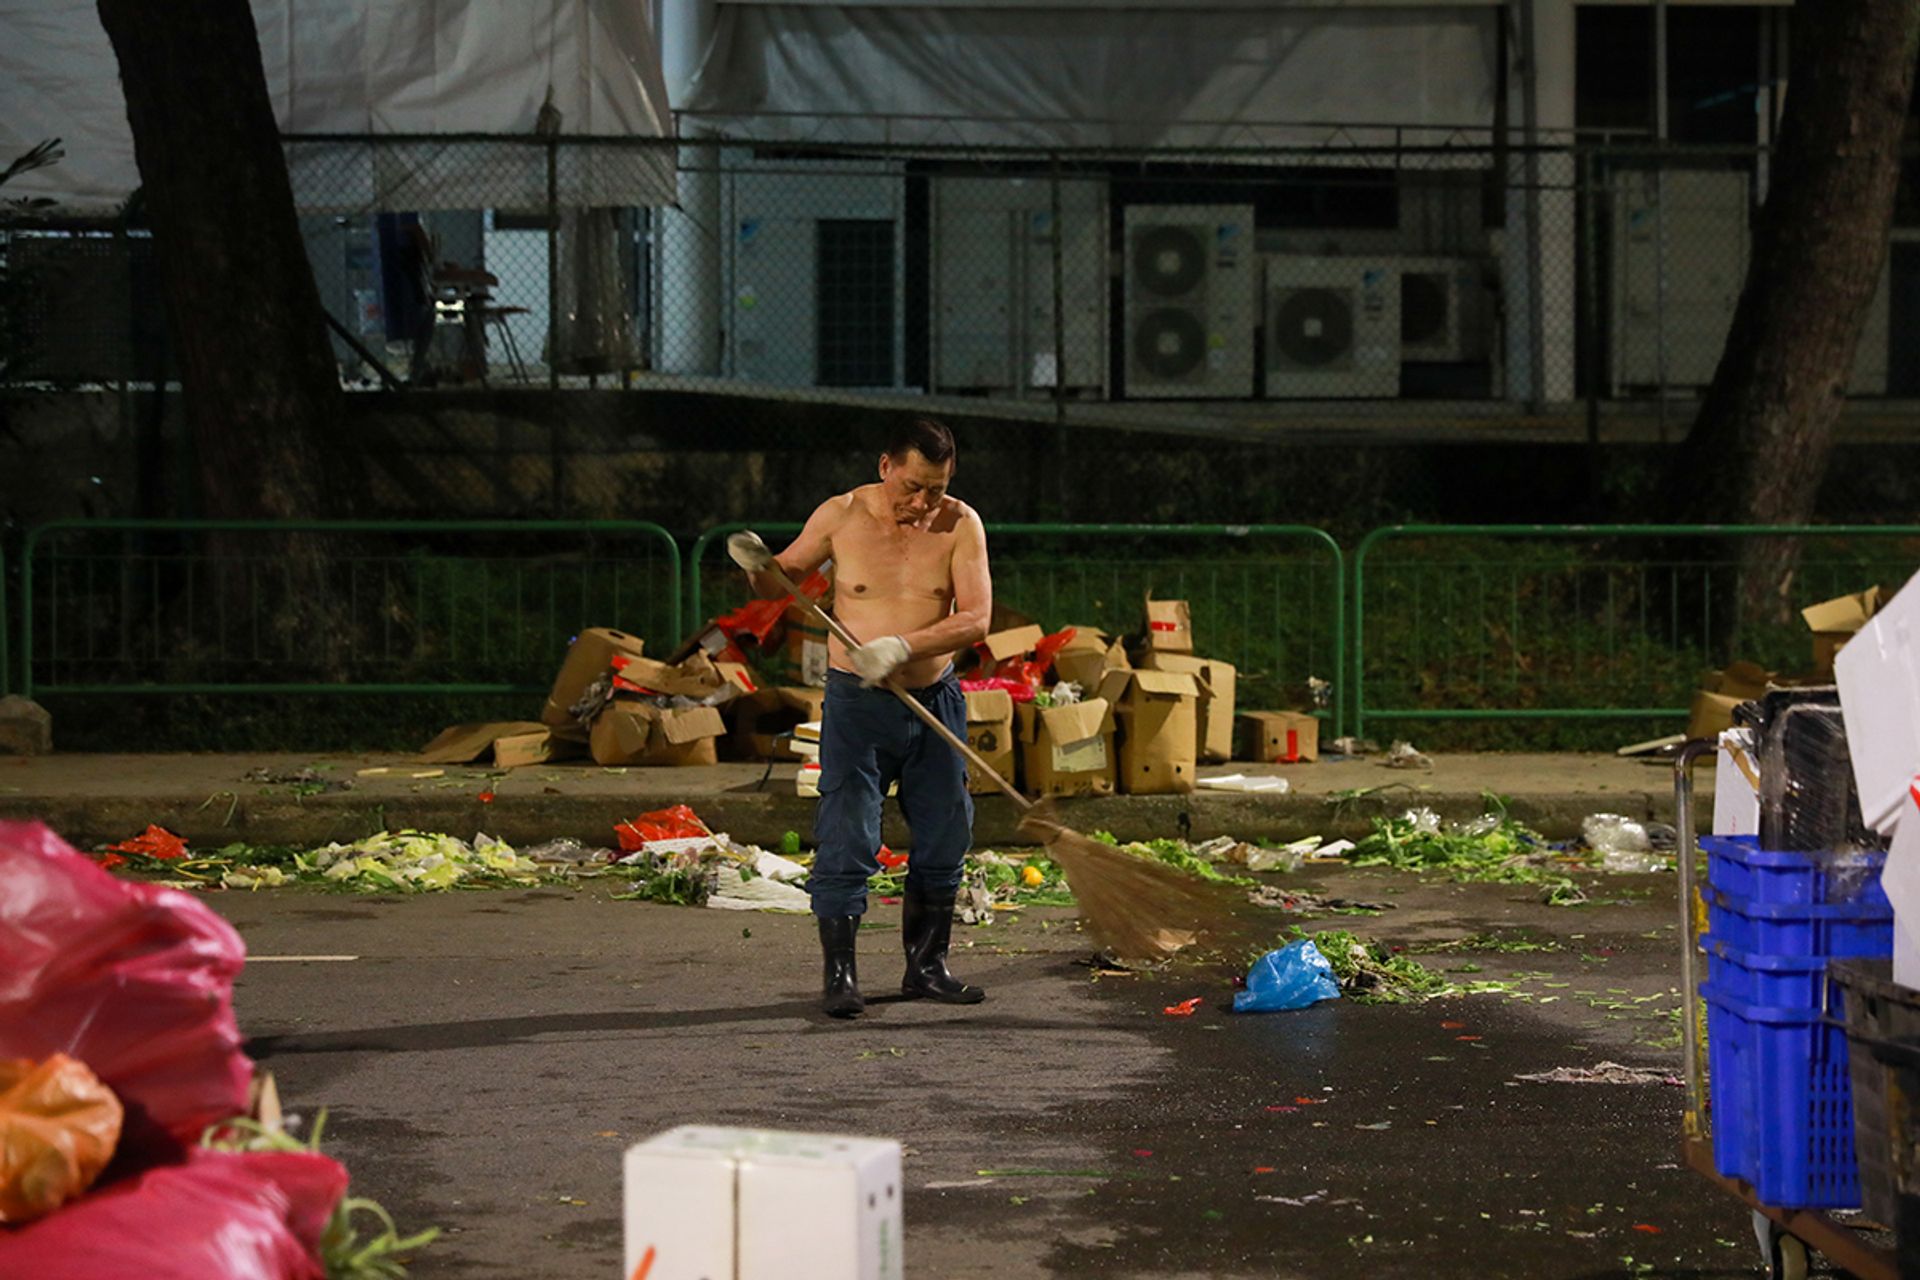 Mr Lew San Woon, 71, sweeping the street at the end of a night on May 6. For over 40 years, after selling vegetables every night, he would clear the rubbish for a small fee from the vendors.